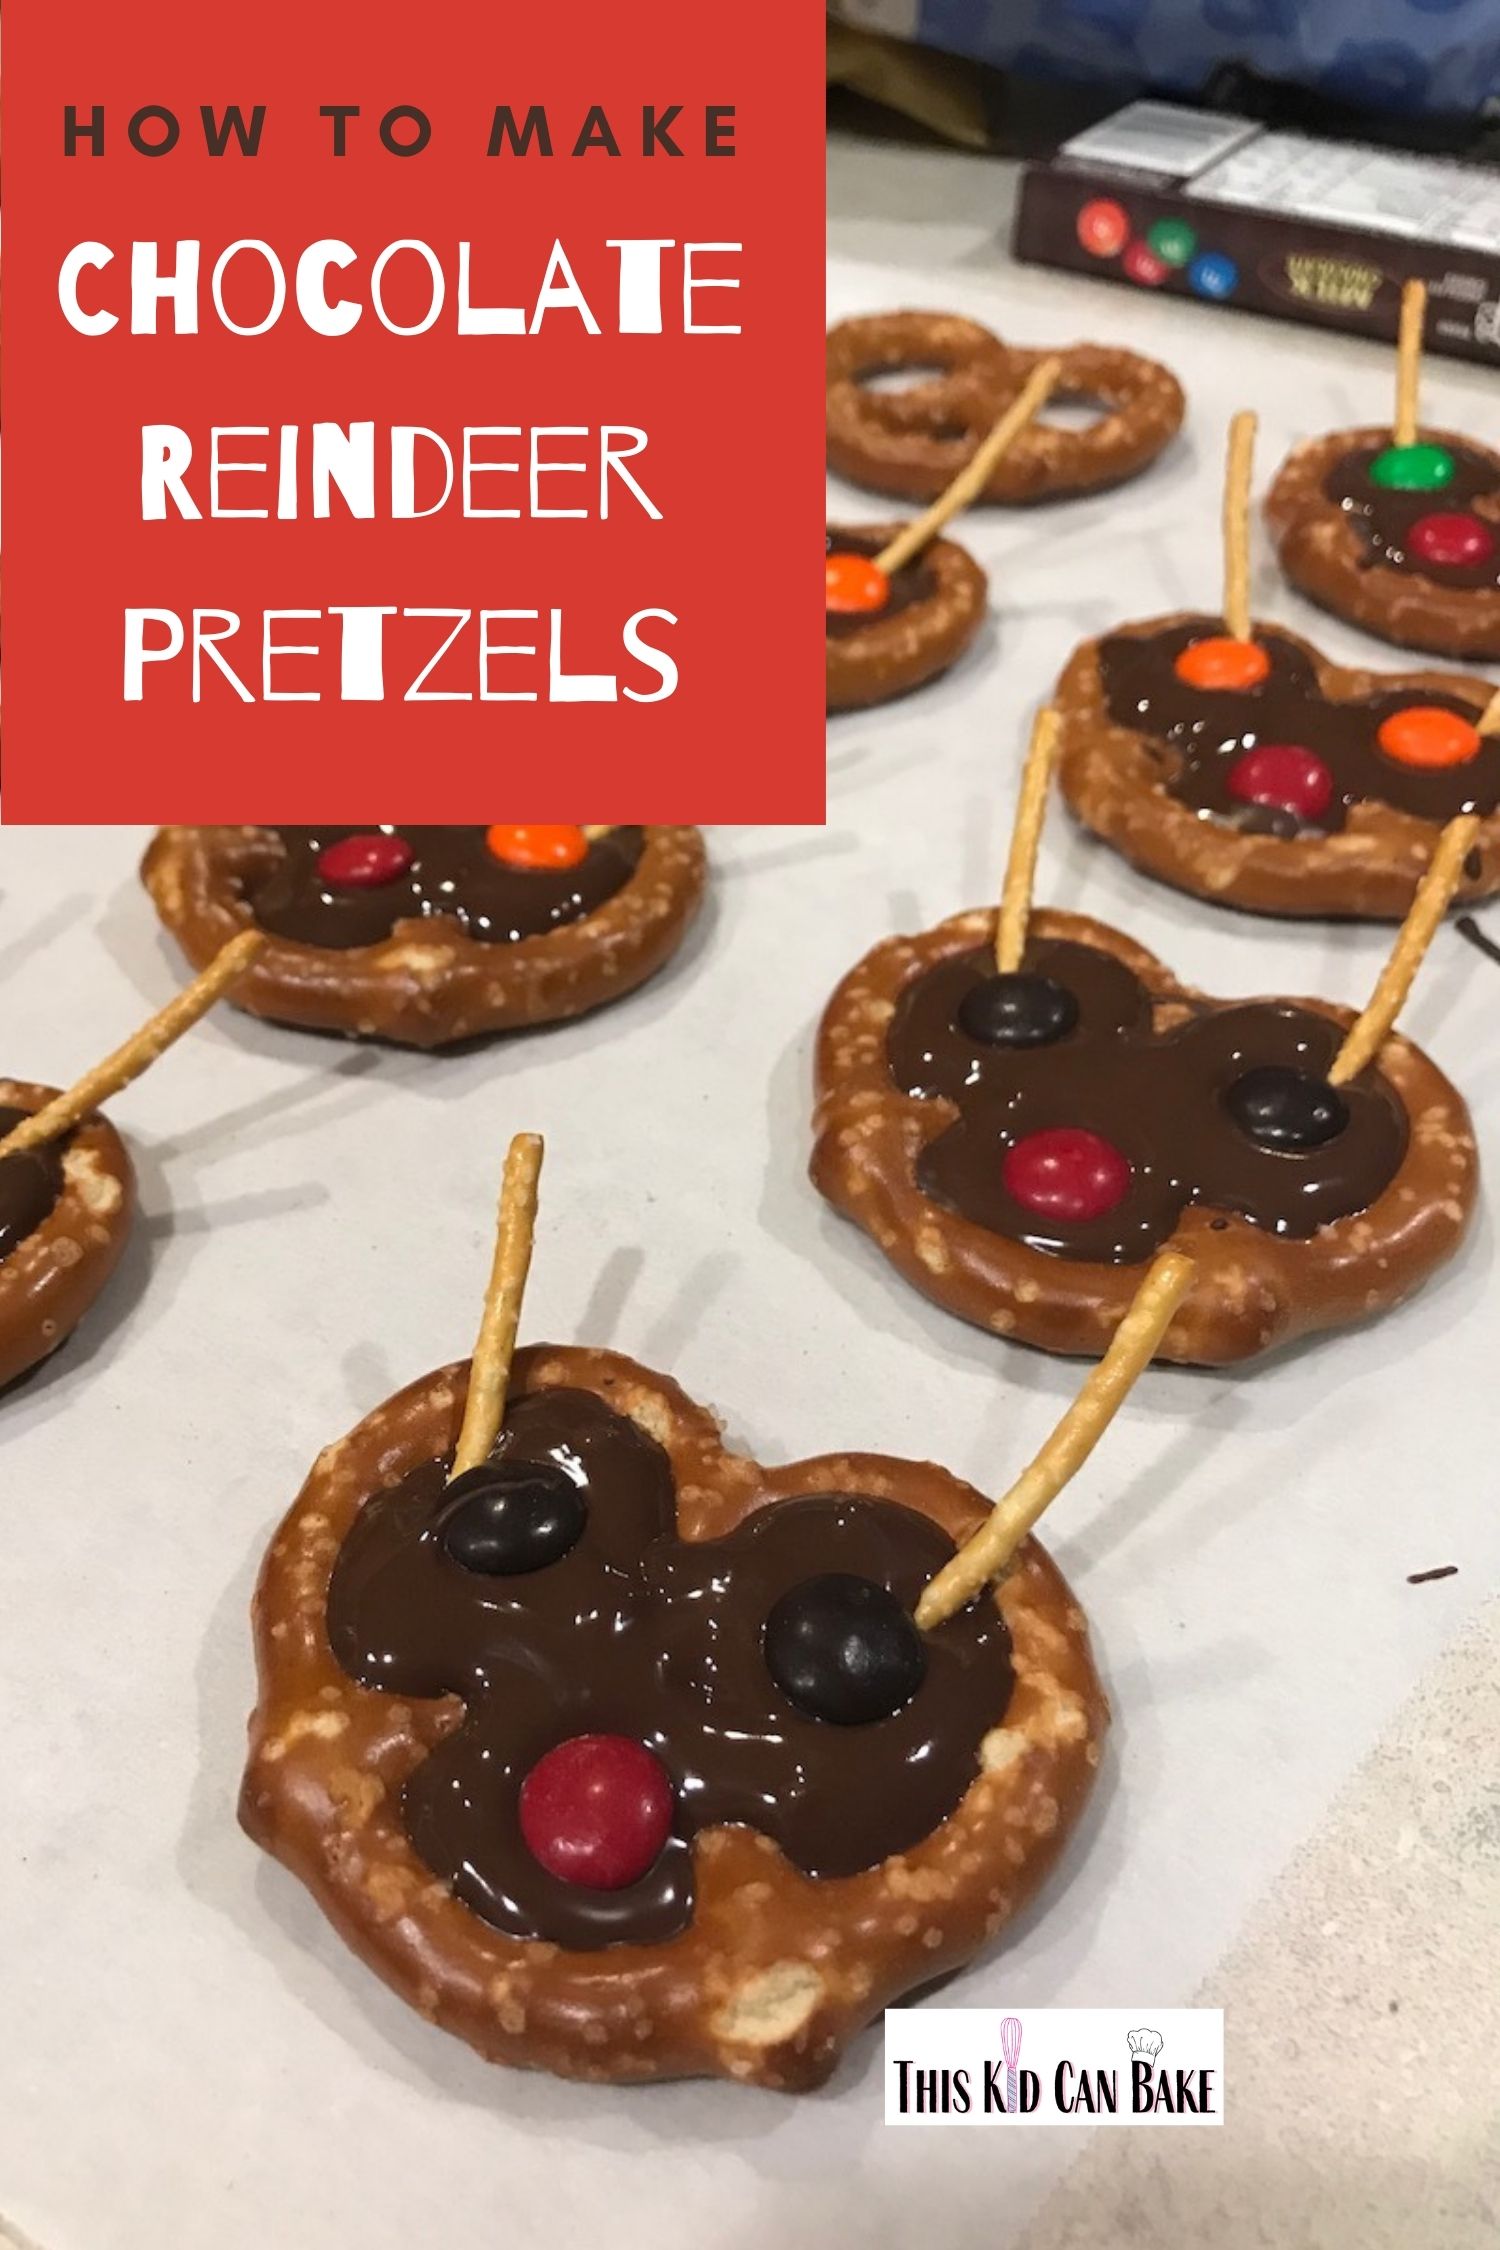 A picture of chocolate reindeer pretzels with a red element that has text that says "How to Make Chocolate Reindeer Pretzels".